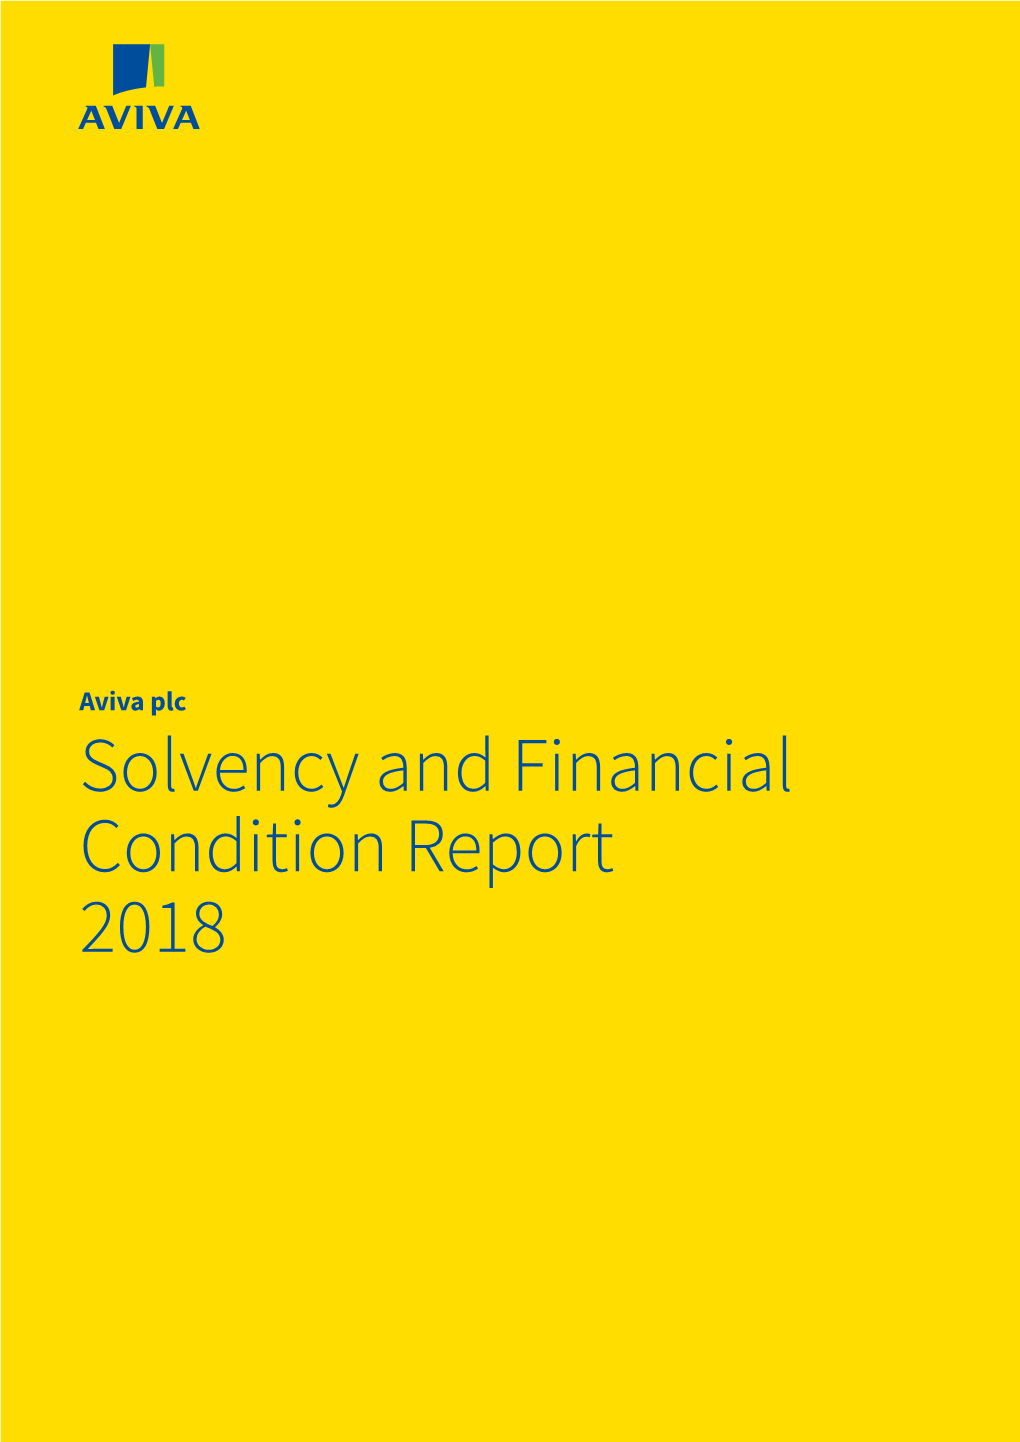 Solvency and Financial Condition Report 2018 Contents